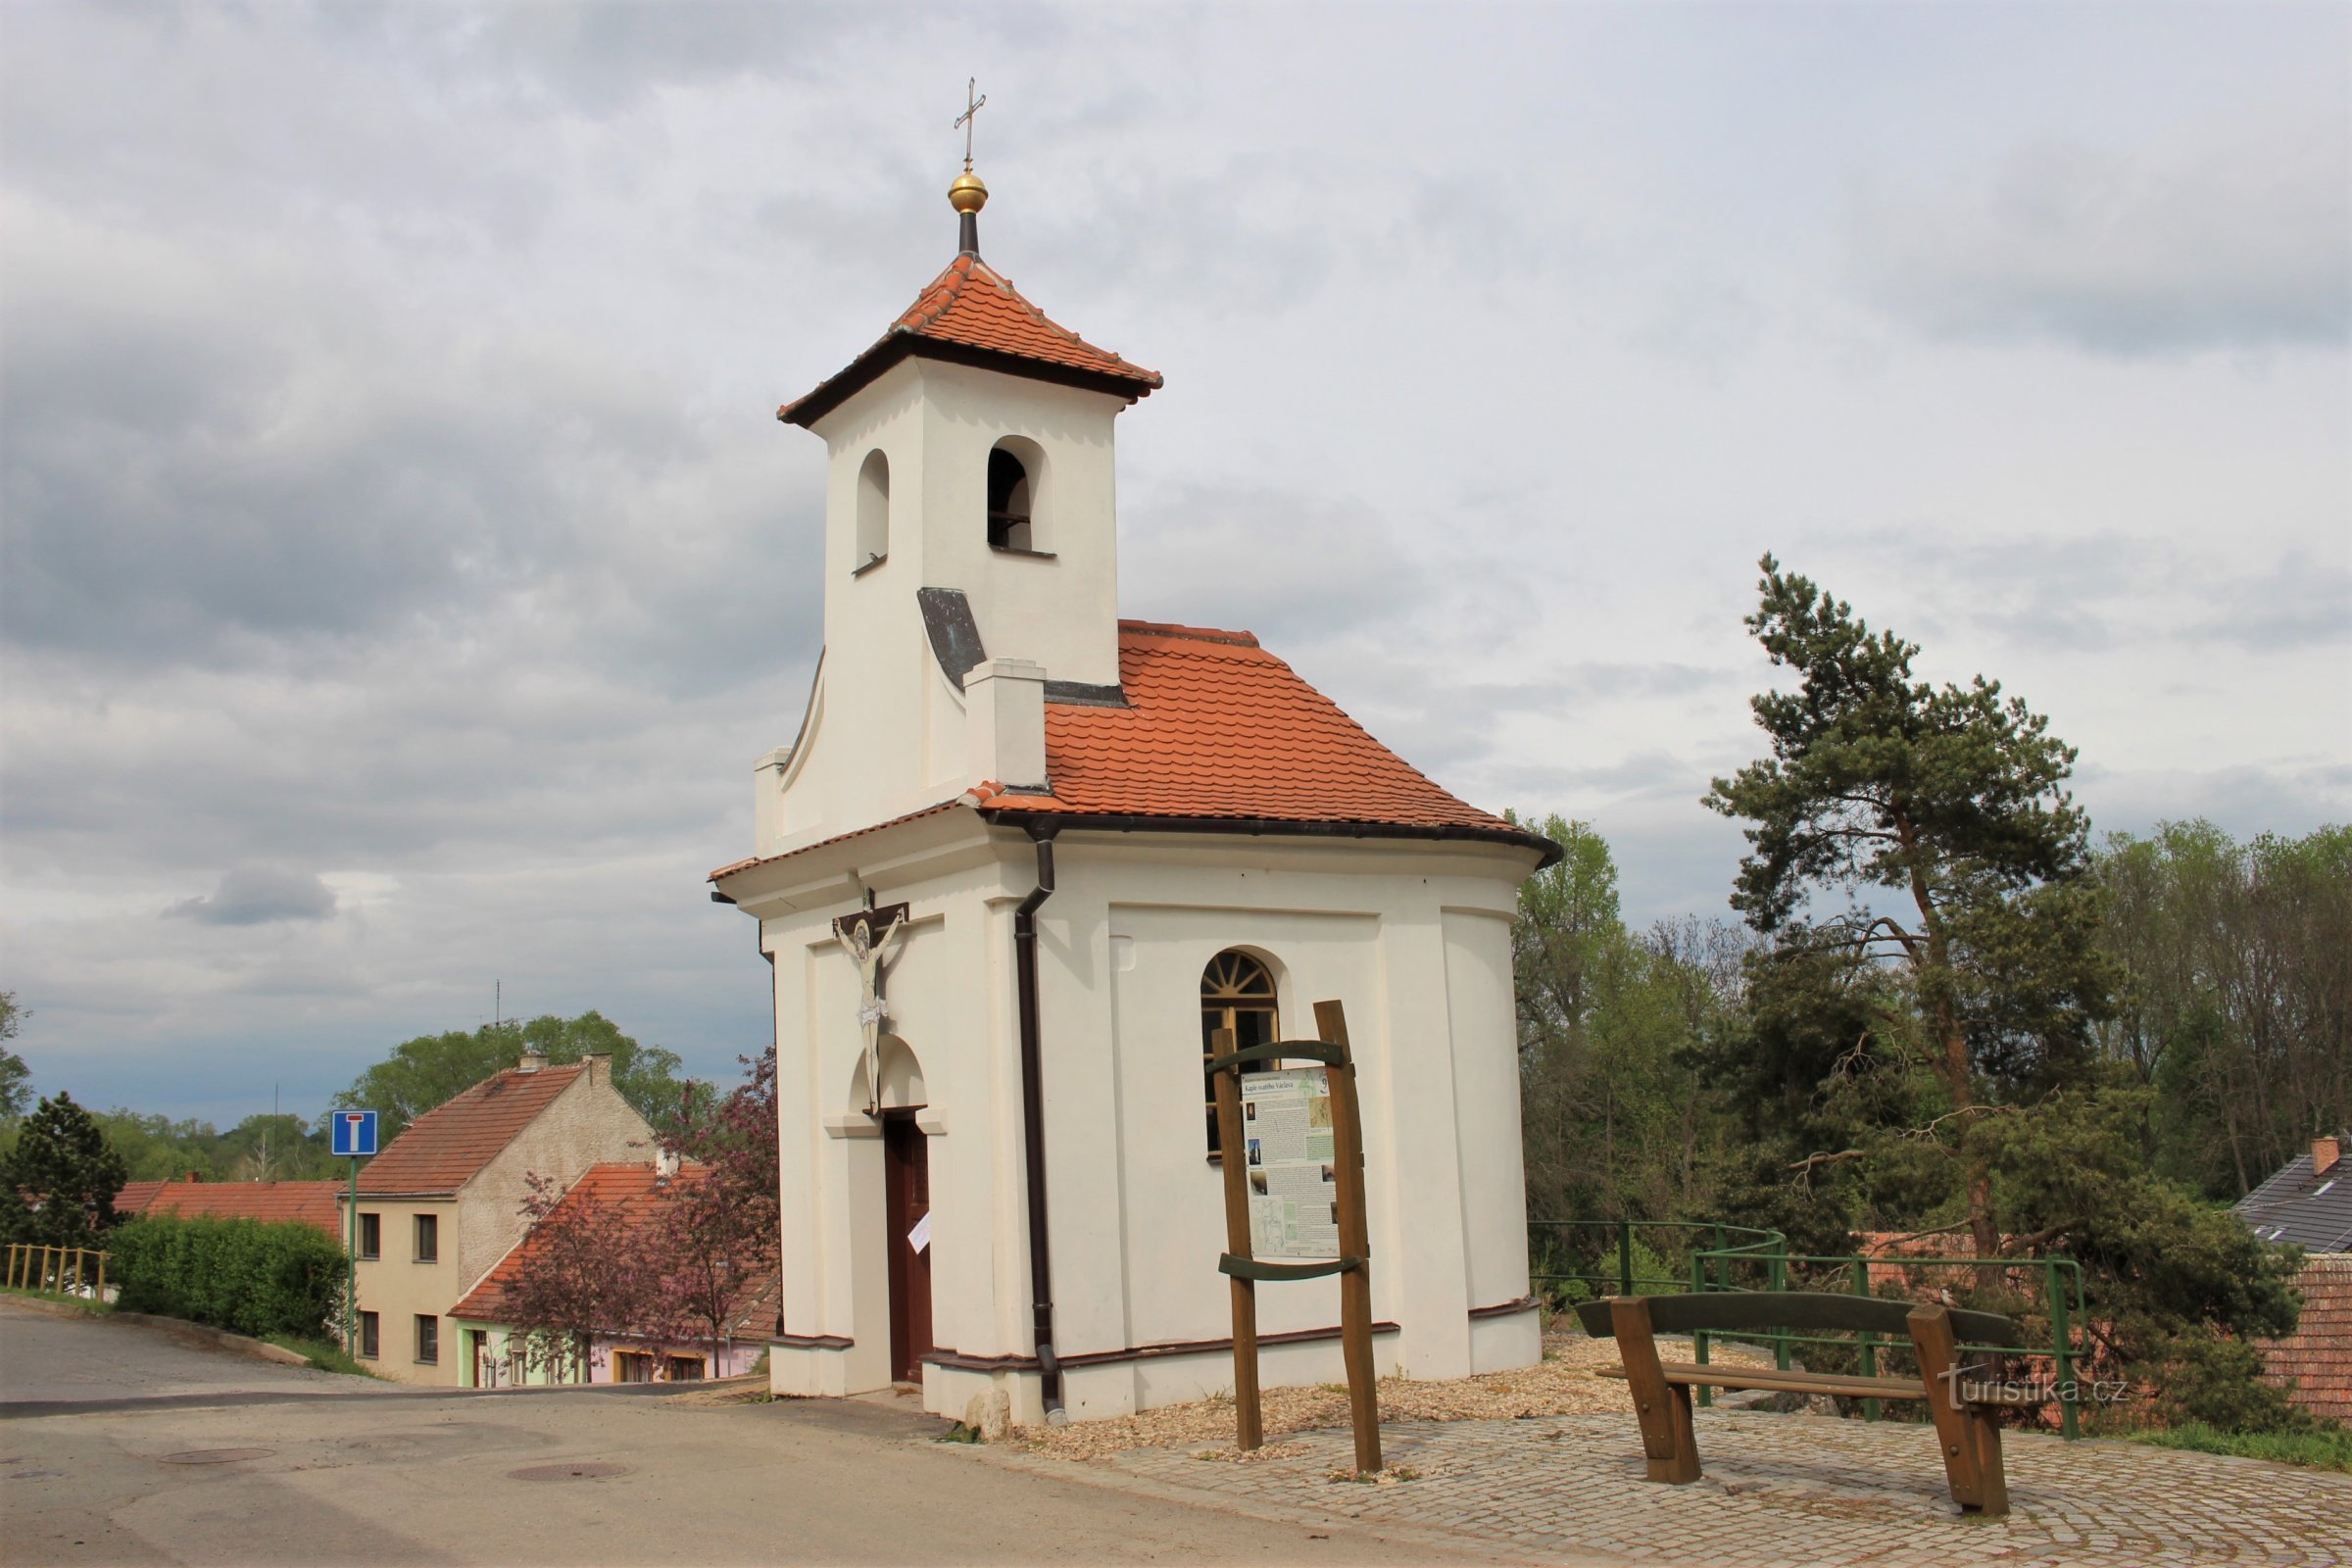 Chapel of St. Václav after the reconstruction and modification of the surrounding area